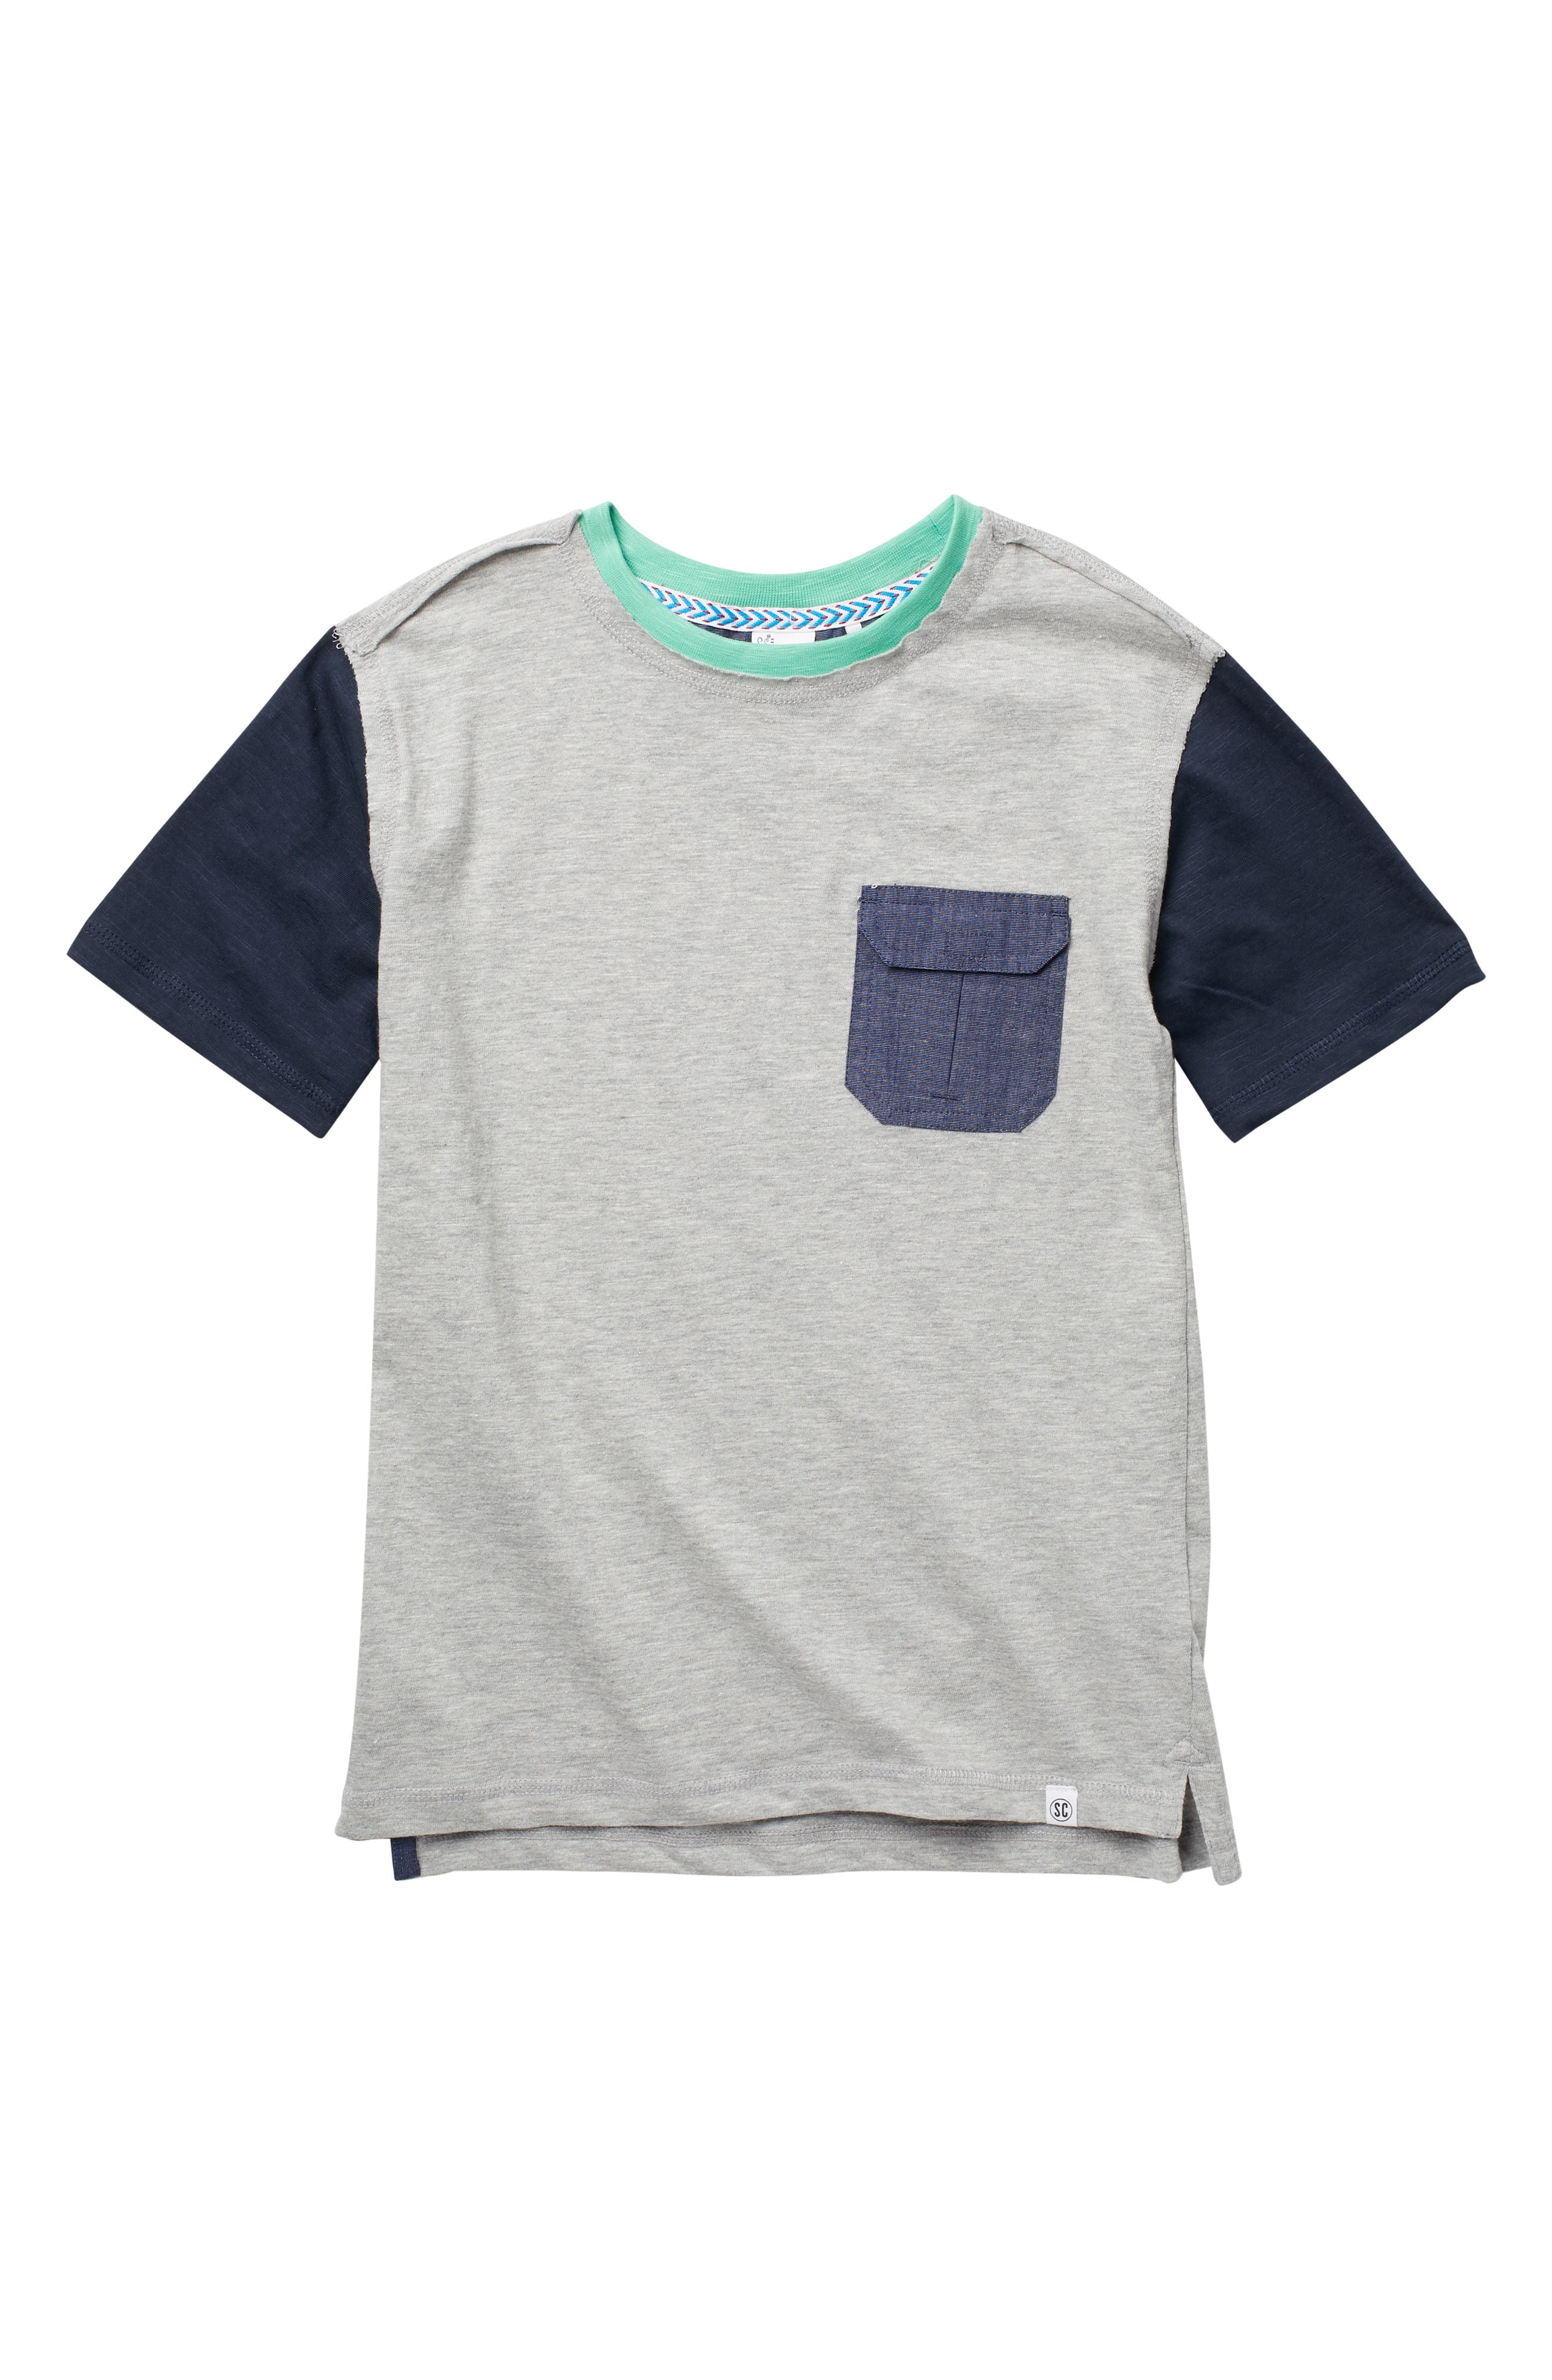 Sovereign Code Kids' Mcnair Colorblock T-shirt In Heather Grey